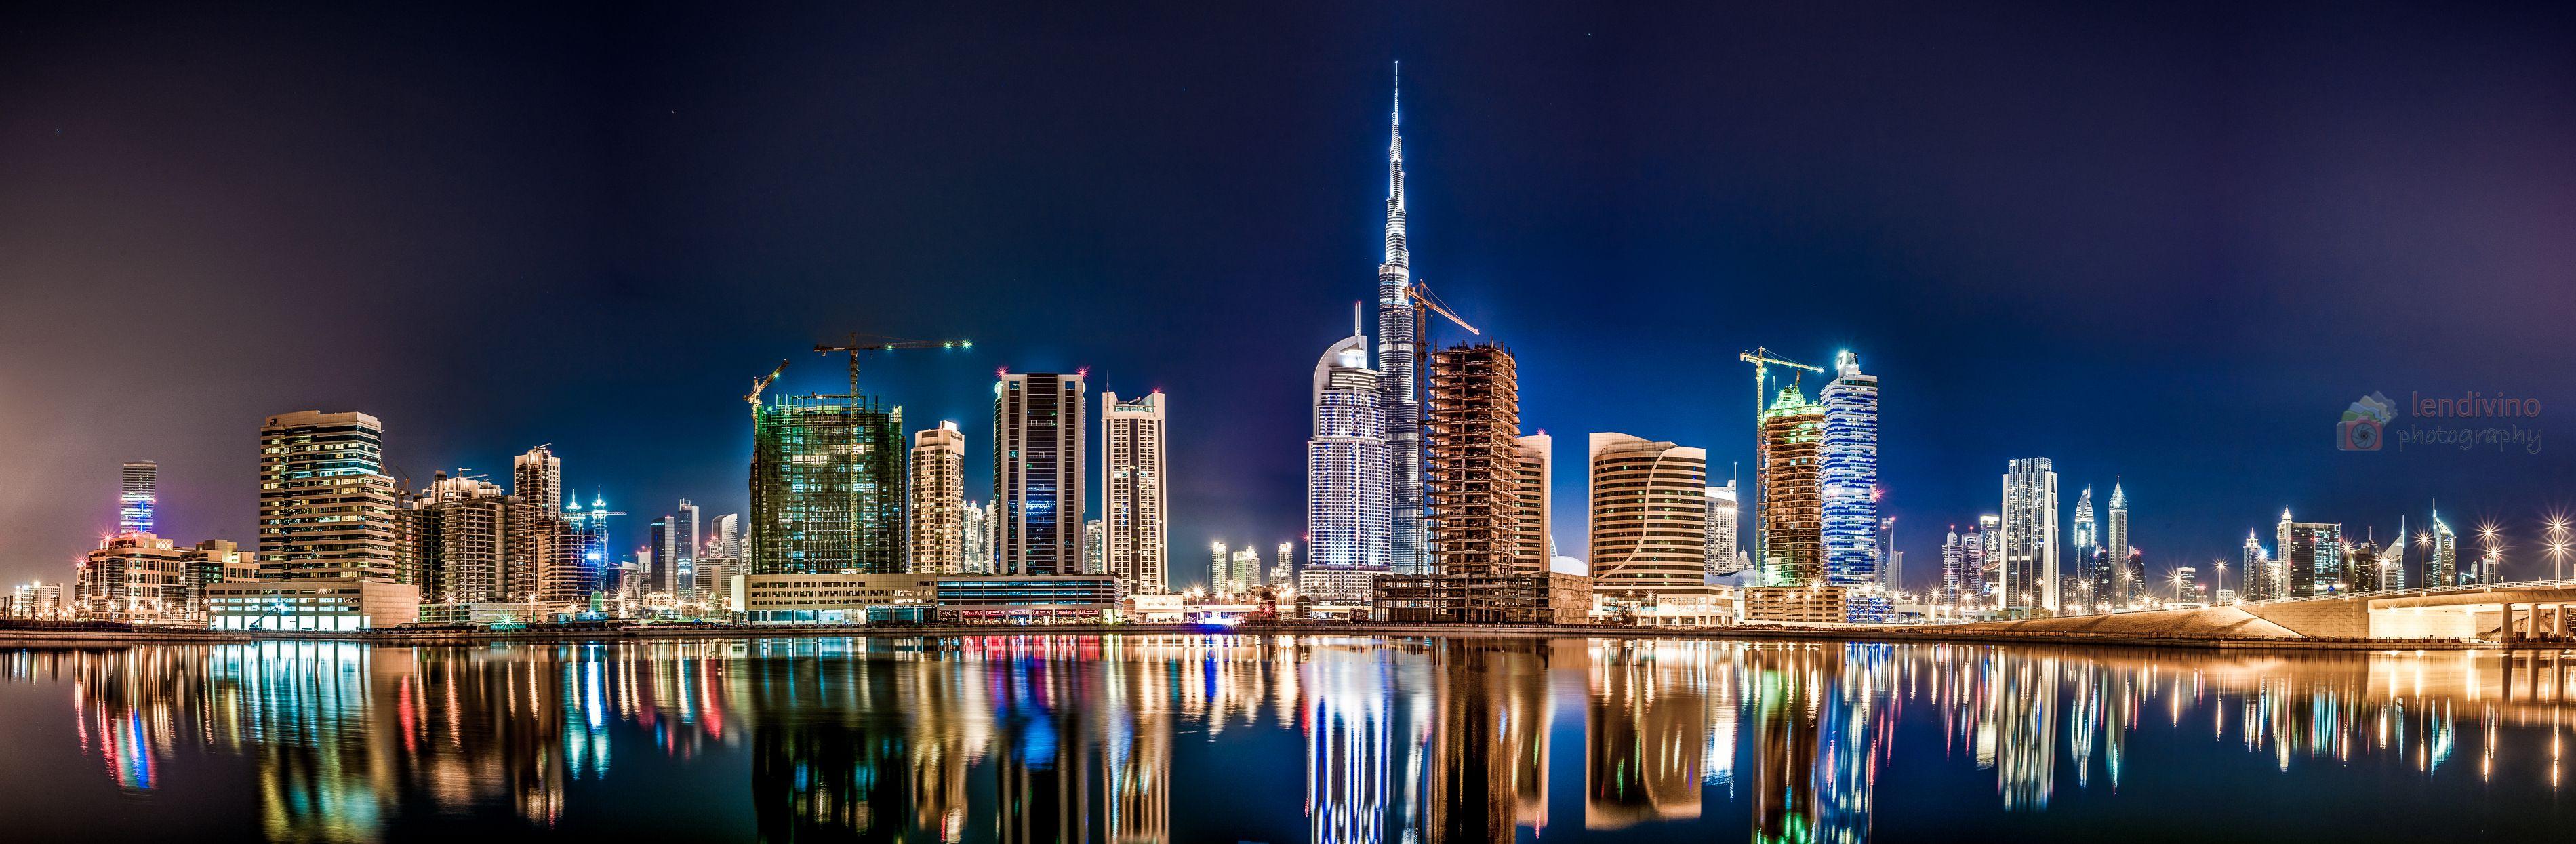 Dubai at night Wallpaper Concept HD / Wallpaper City 73213 high quality Background for mobile, iphone, desktop. Dubai tour, Dubai wallpaper hd, Dubai holidays